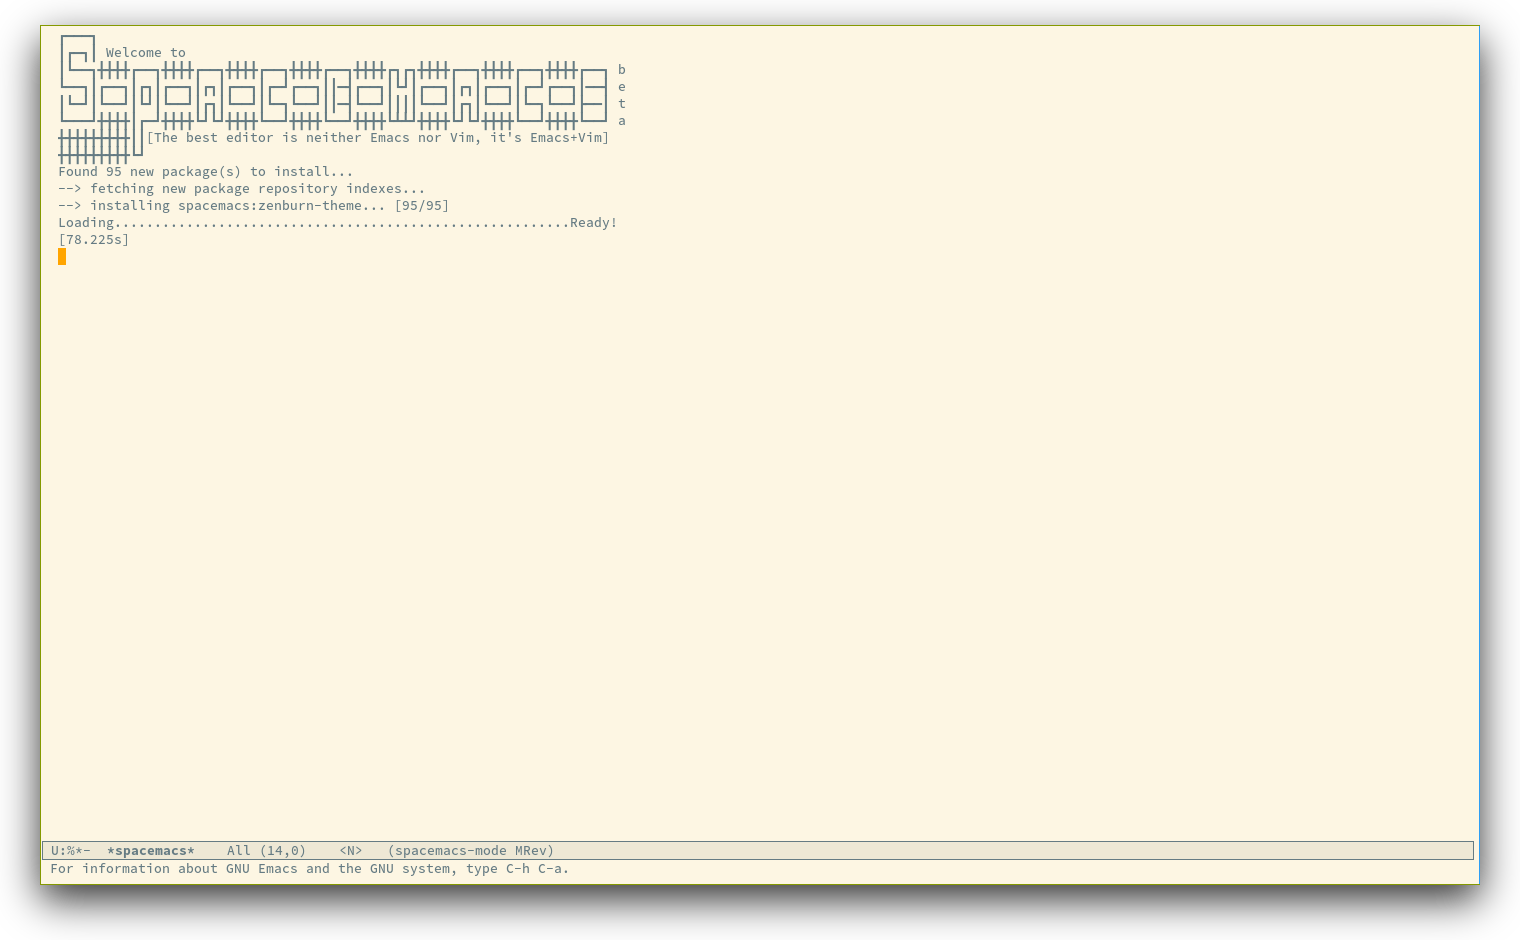 /TakeV/spacemacs/media/commit/f3cb4399ba4fa982c9c82554cbdc1f131ed07d80/doc/img/spacemacs-startup.png